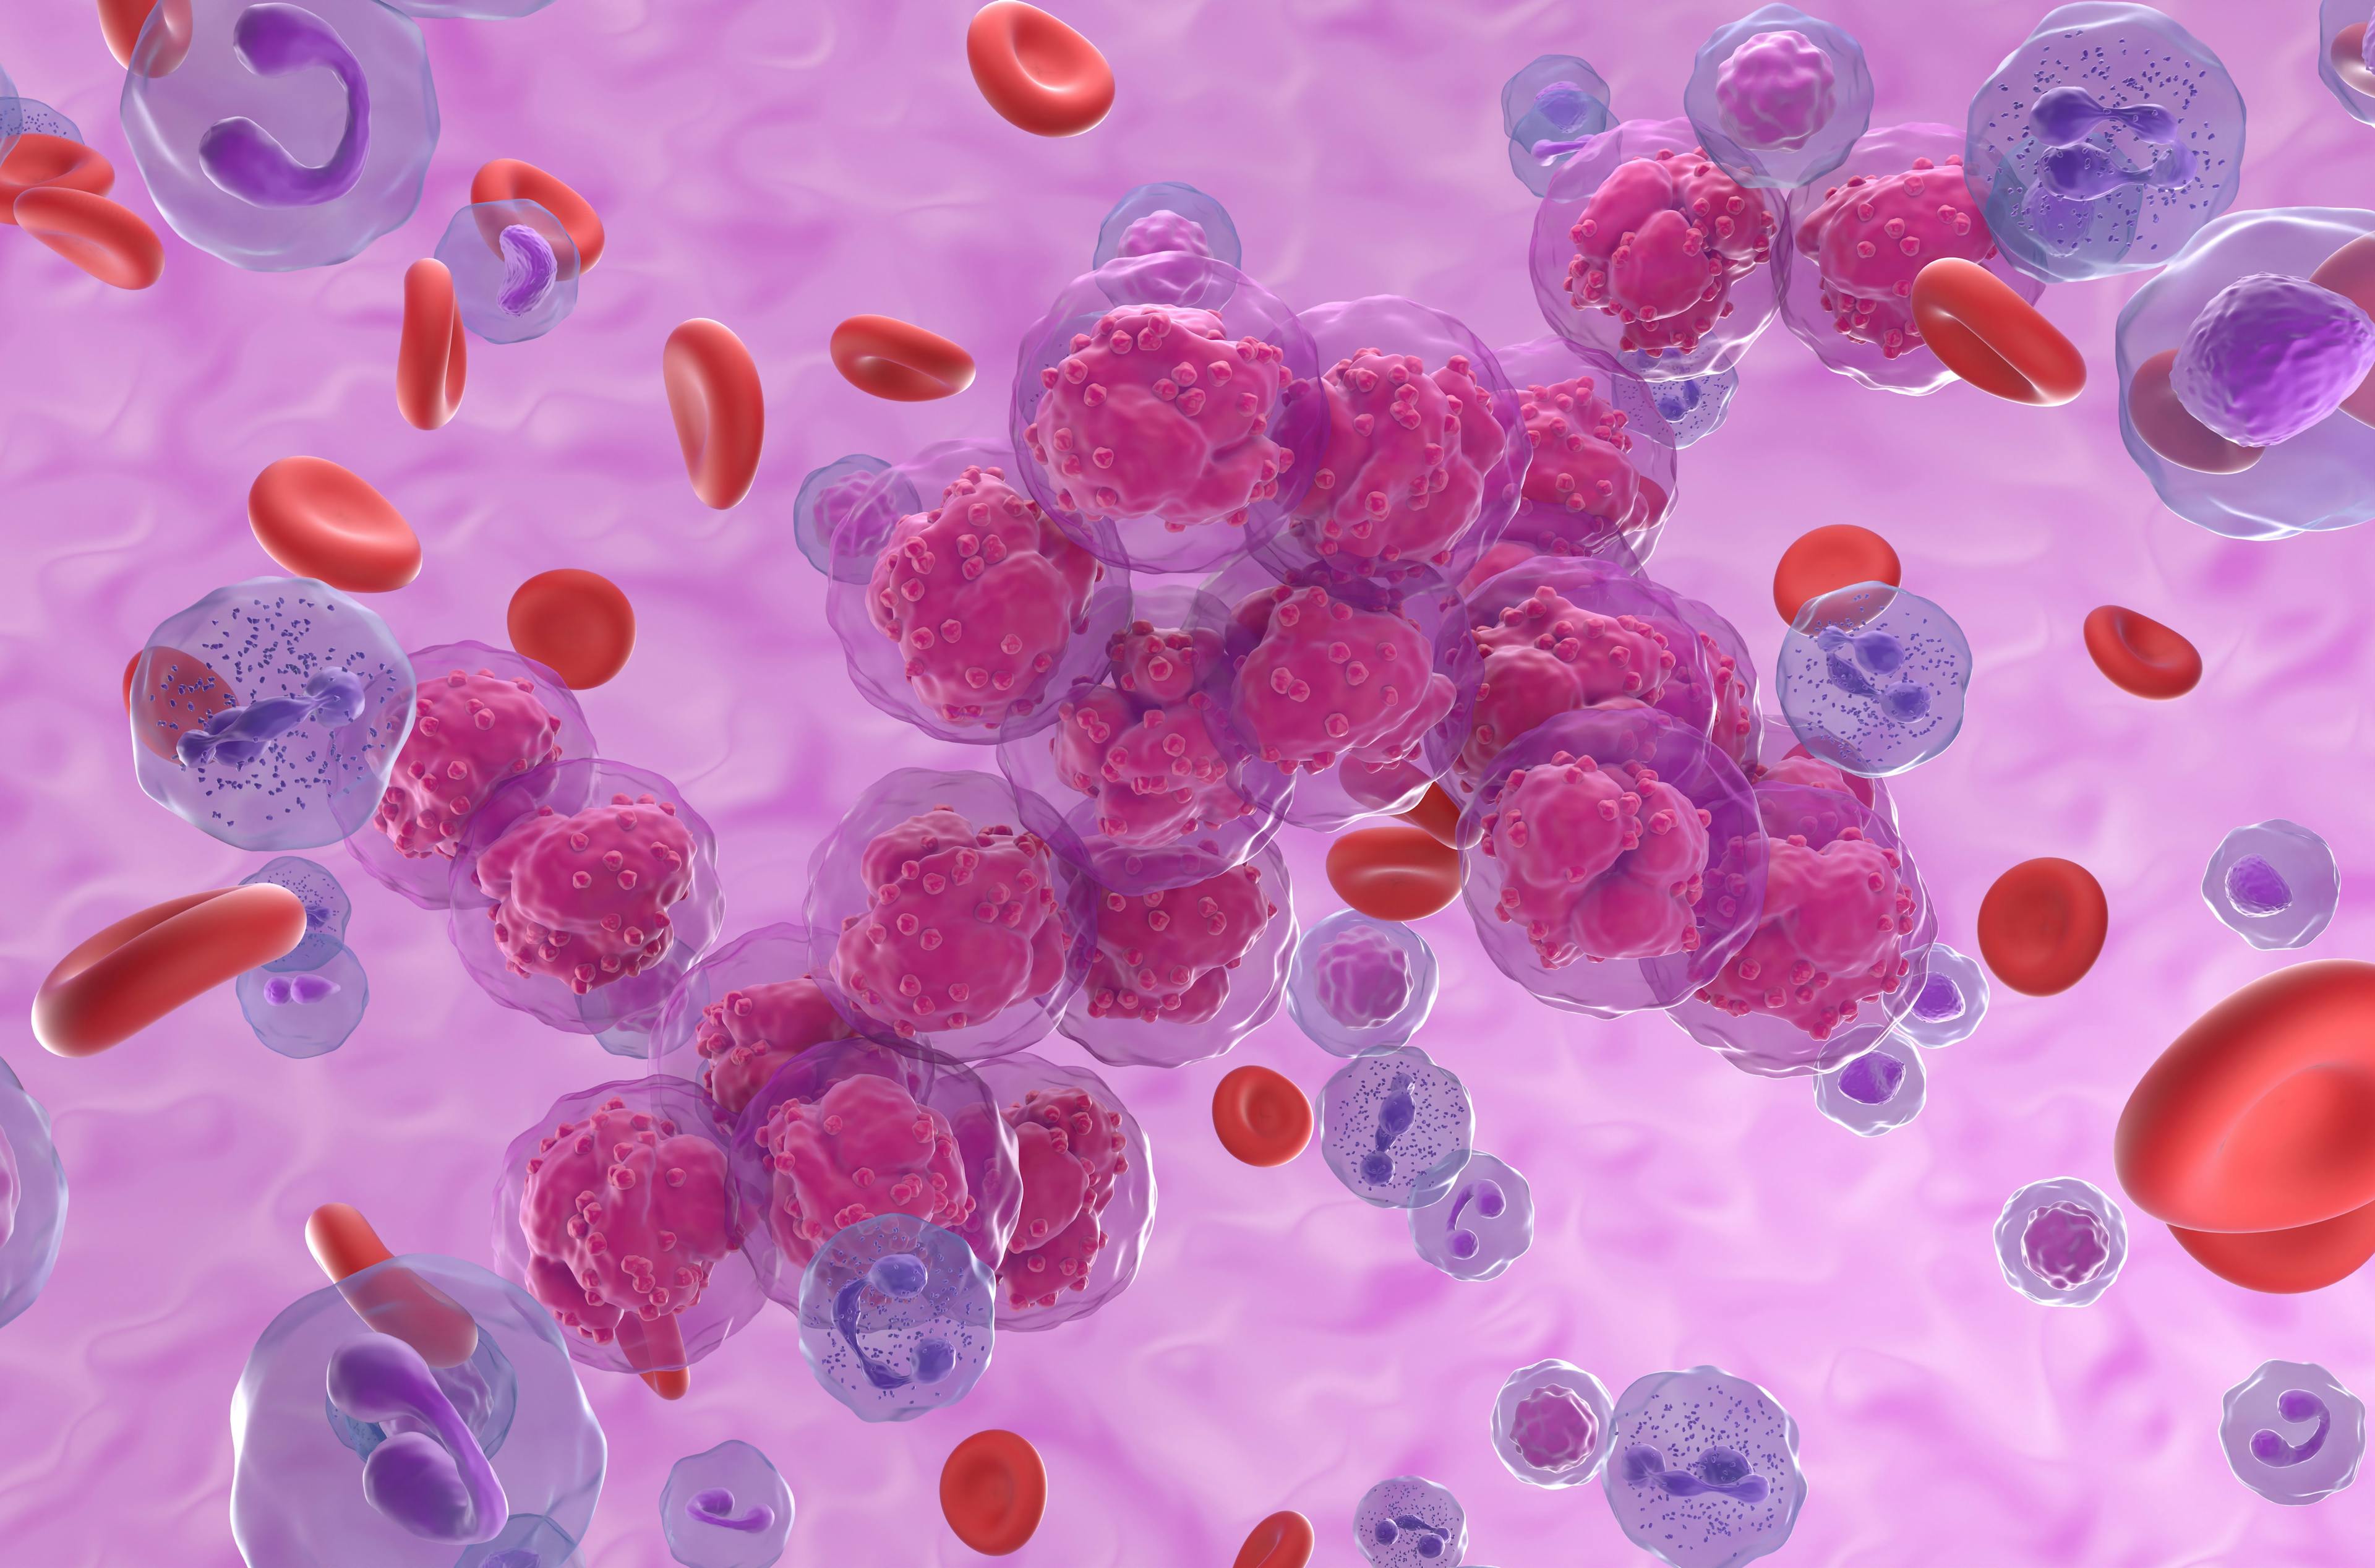 Acute lymphoblastic leukemia (ALL) cancer cell clusters in the blood flow - isometric view 3d illustration | Image Credit: LASZLO - stock.adobe.com